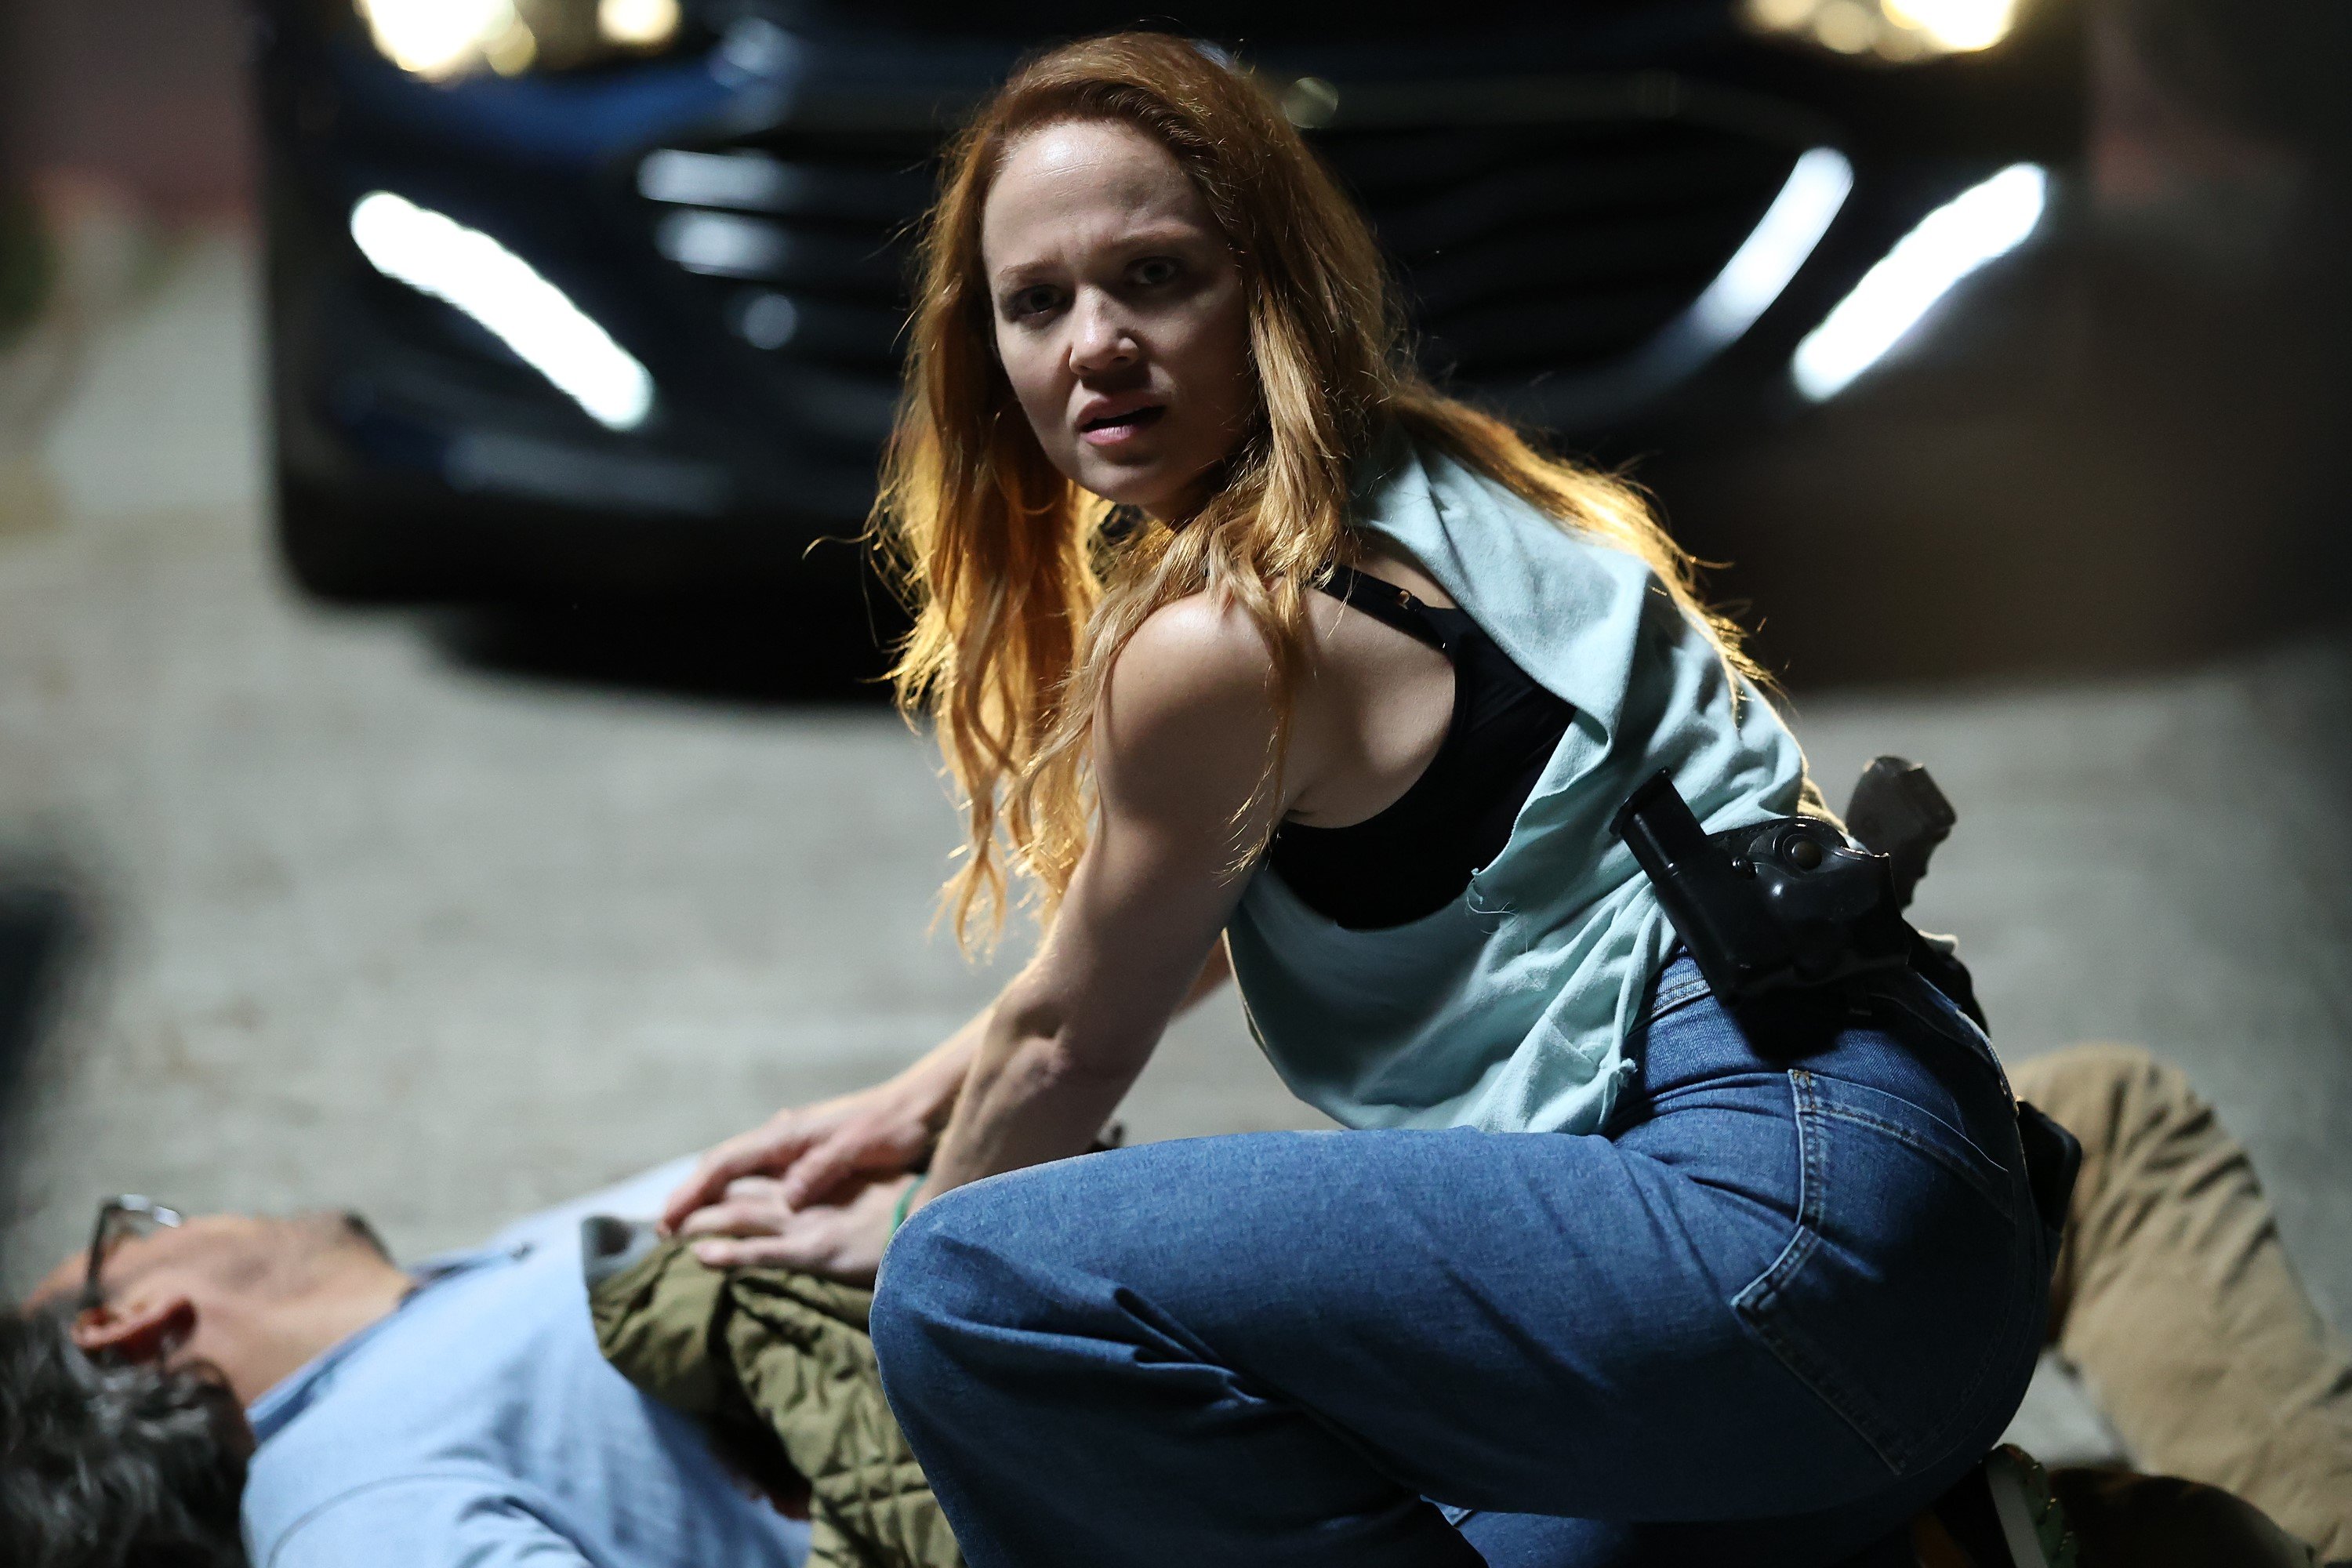 Erika Christensen, in character as Angie Polaski in 'Will Trent' Season 1 Episode 2, wears a light gray tank top over a black bra and jeans as she tends to a gunshot victim.